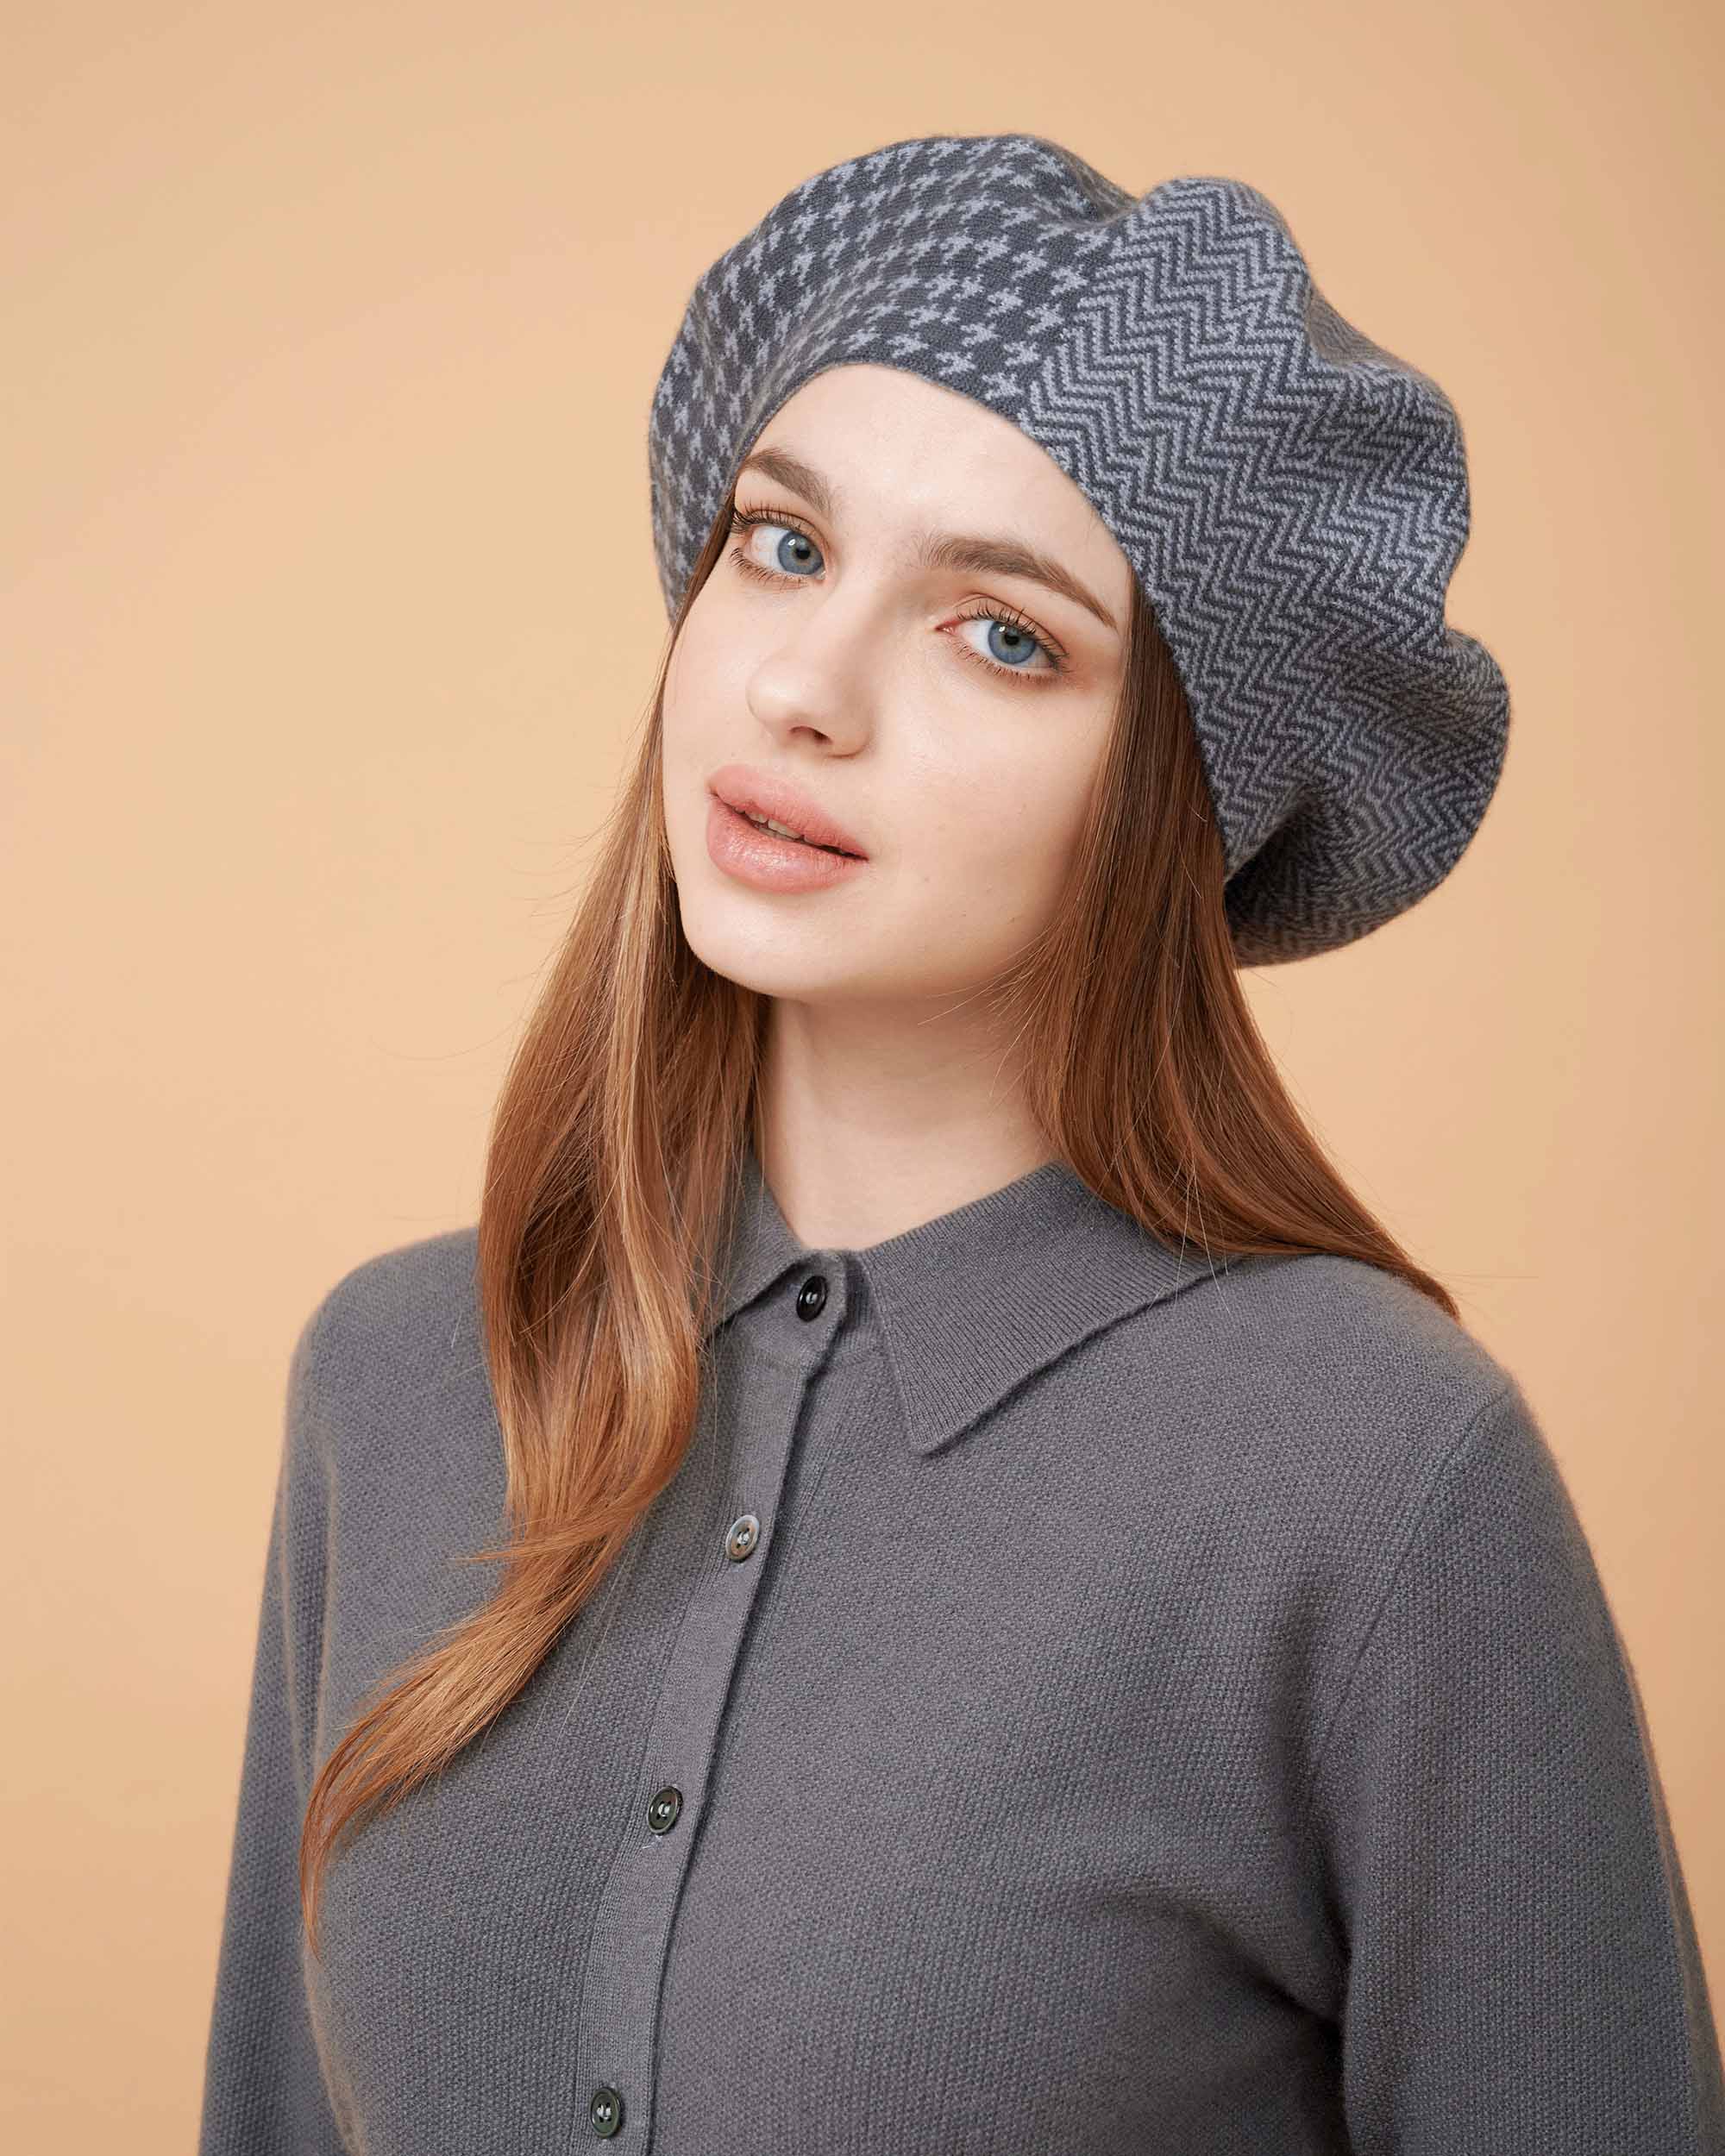 Cashmere Hat , High Quality Hat , Grey Colour Hat, 100% Cashmere Hat , Hat For All Seasons , Made By Davinii , Front Image 